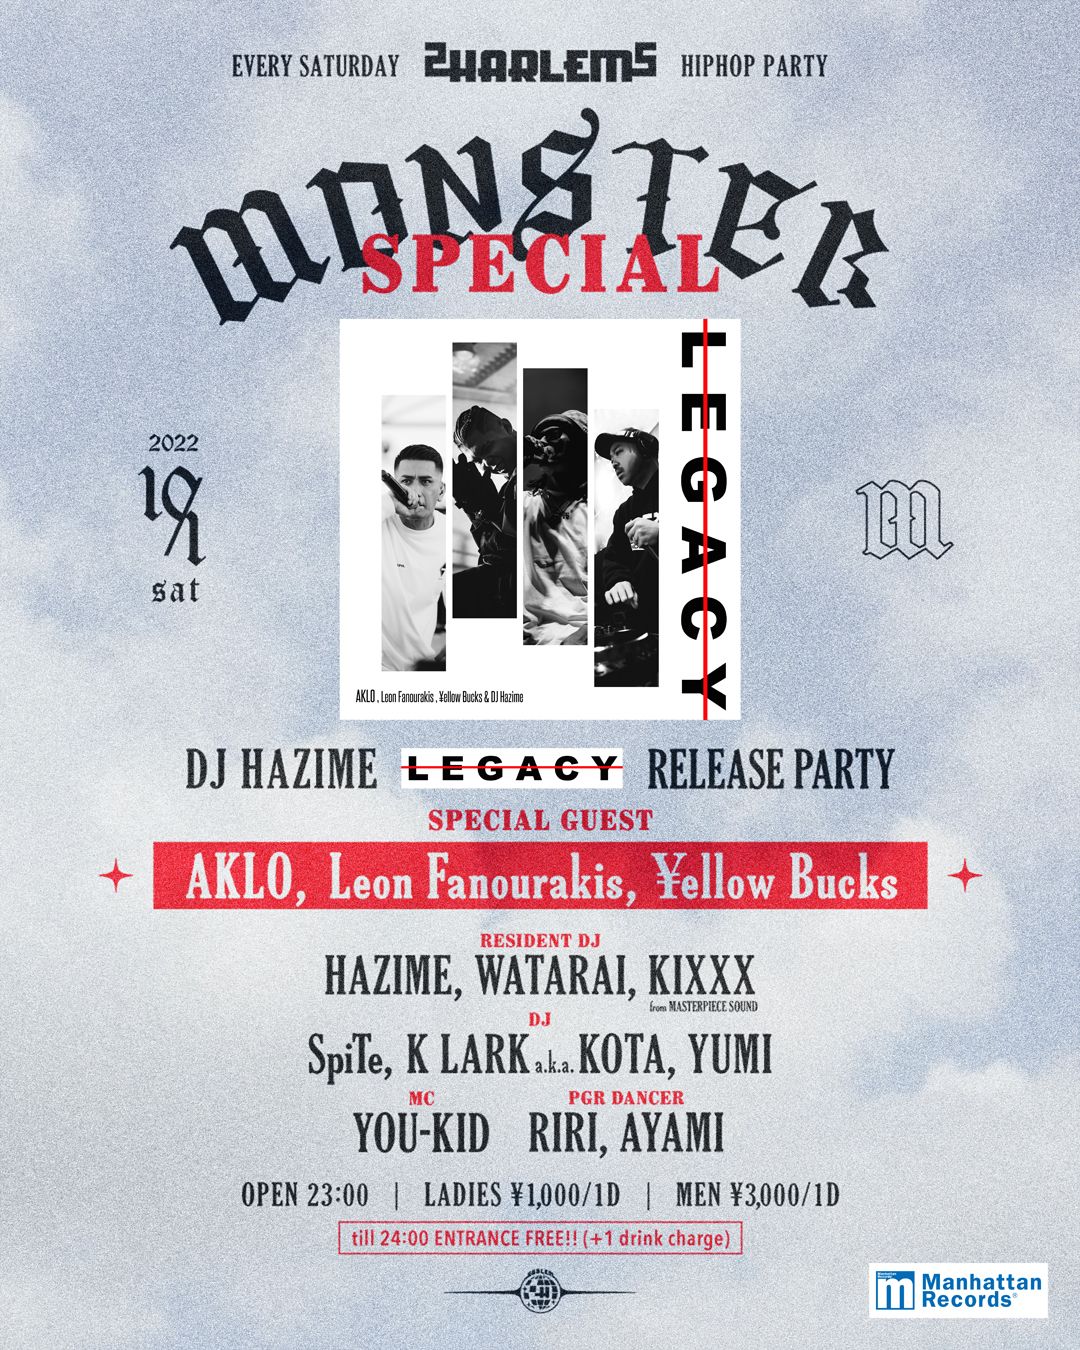 MONSTER SPECIAL -DJ HAZIME “LEGACY” RELEASE PARTY-